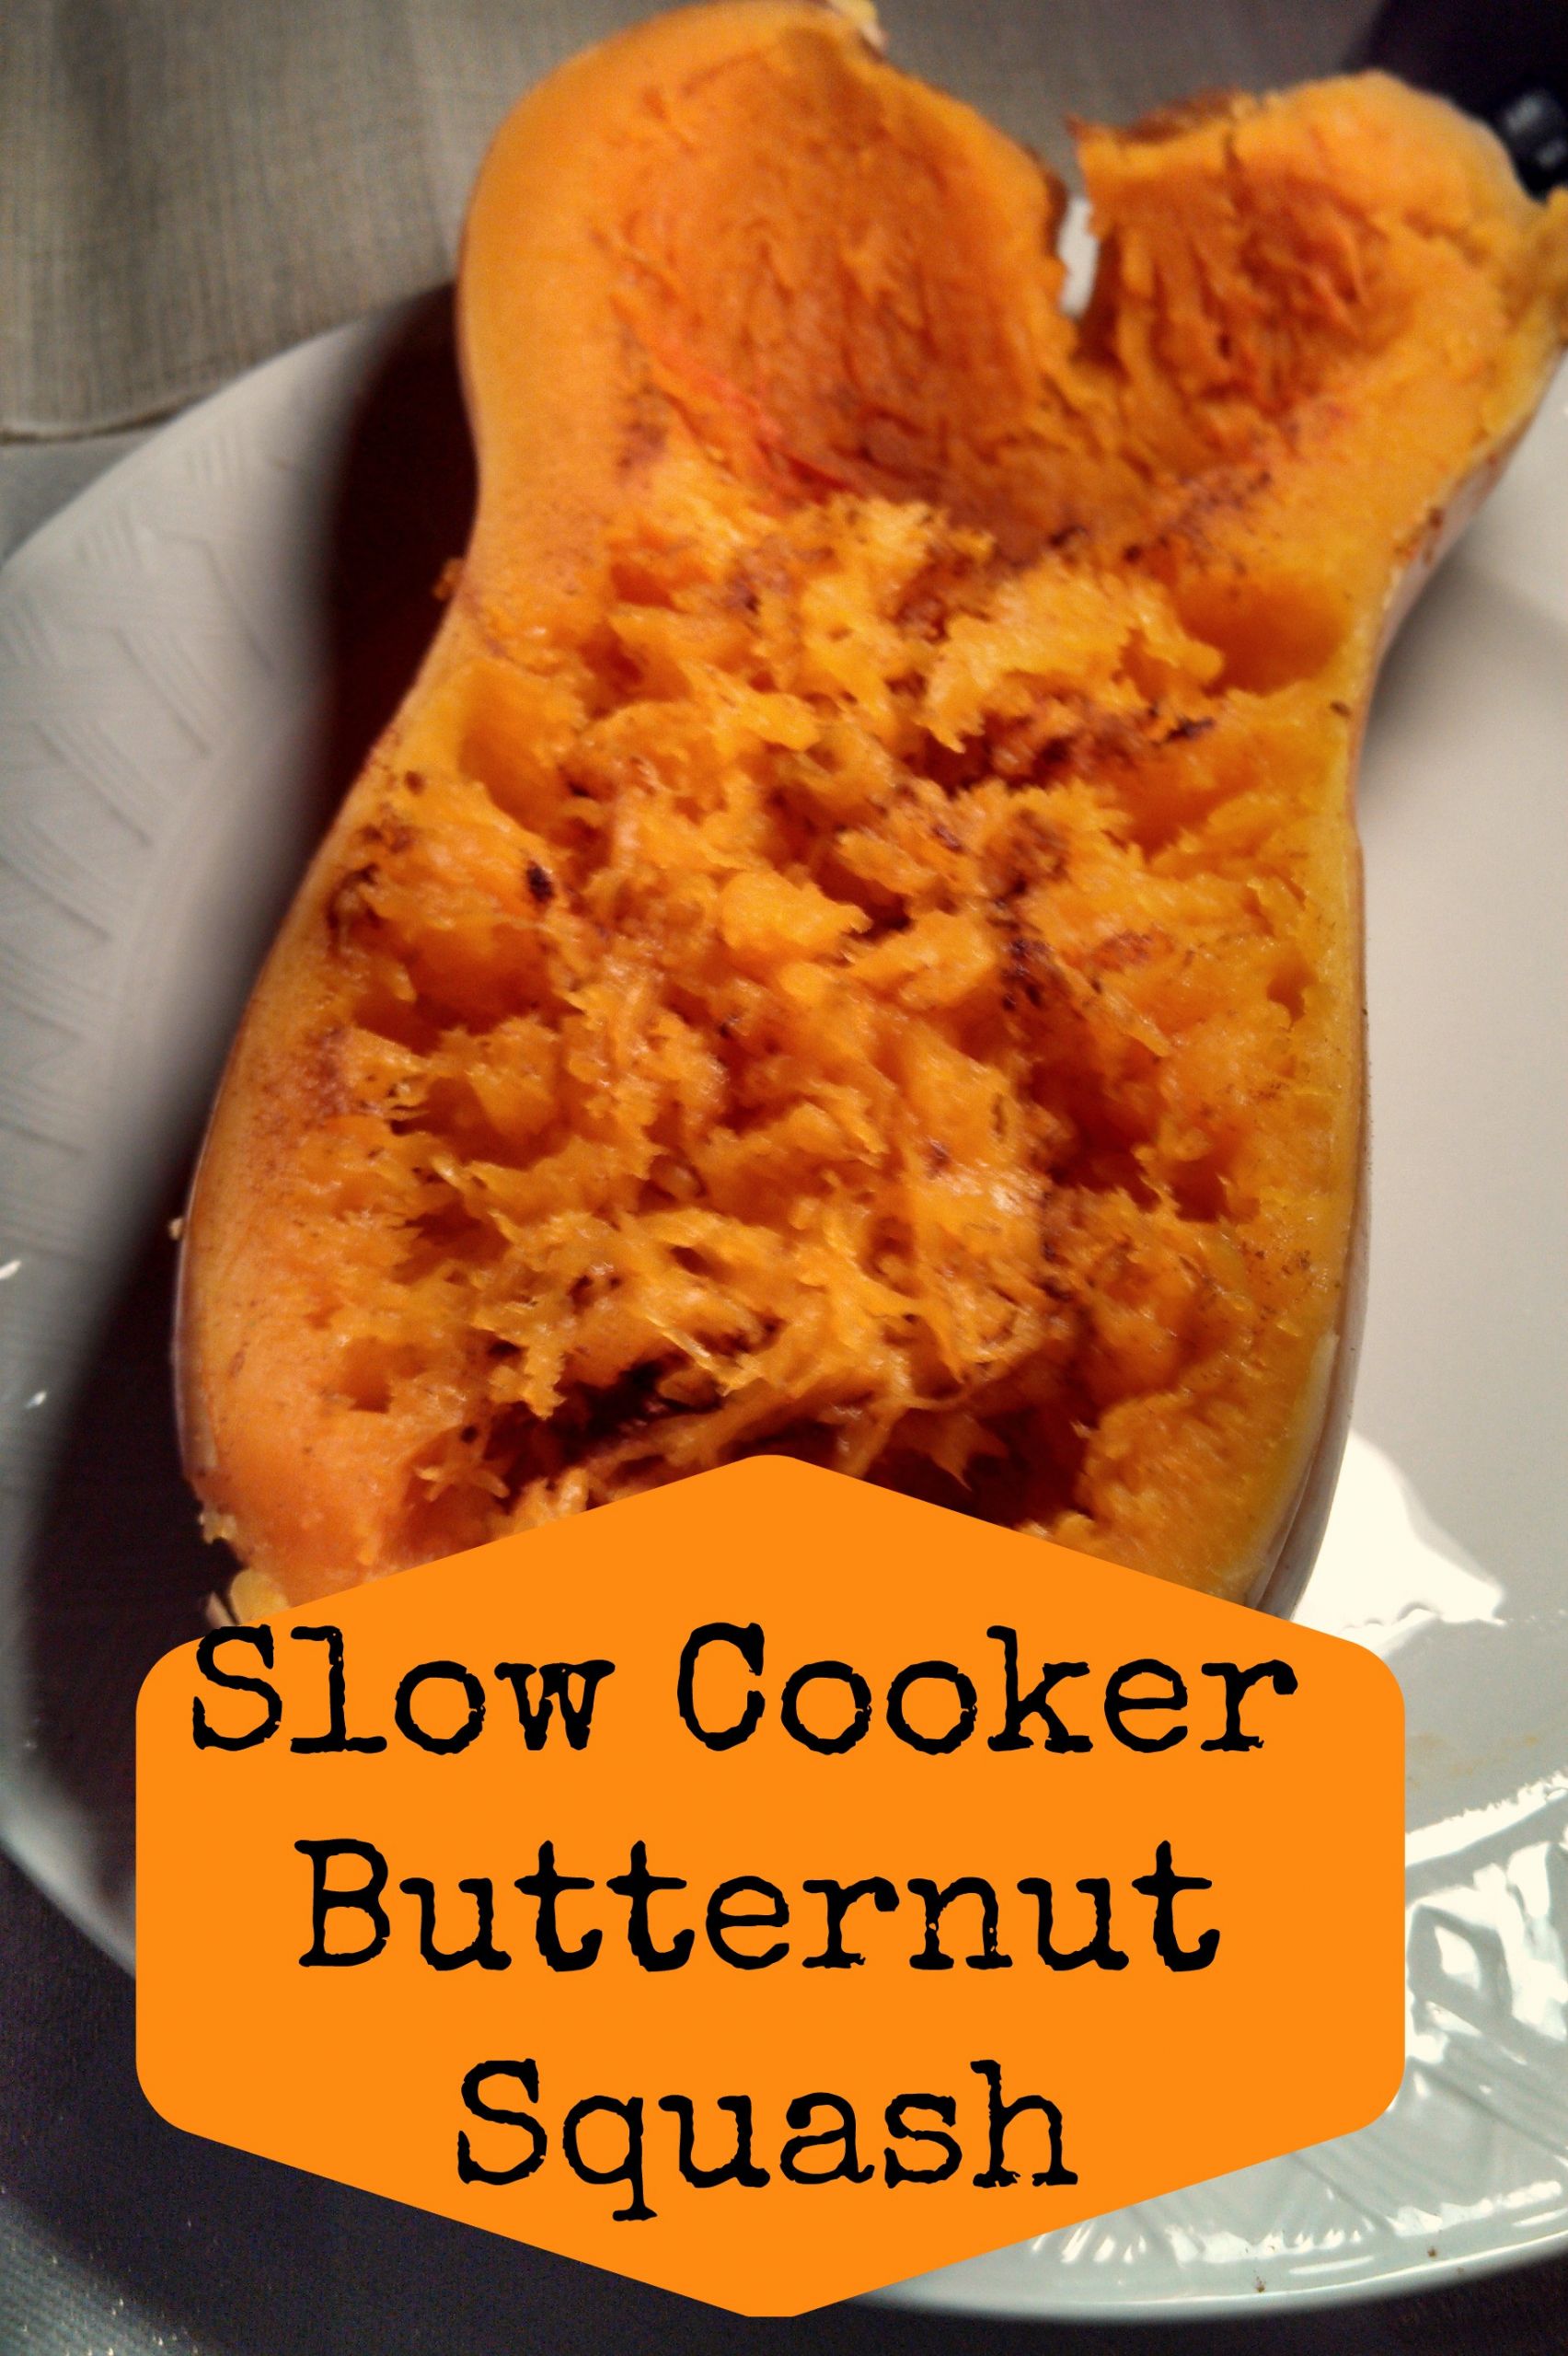 Butternut Squash Slow Cooker
 Slow Cooker Butternut Squash Pure Traditions